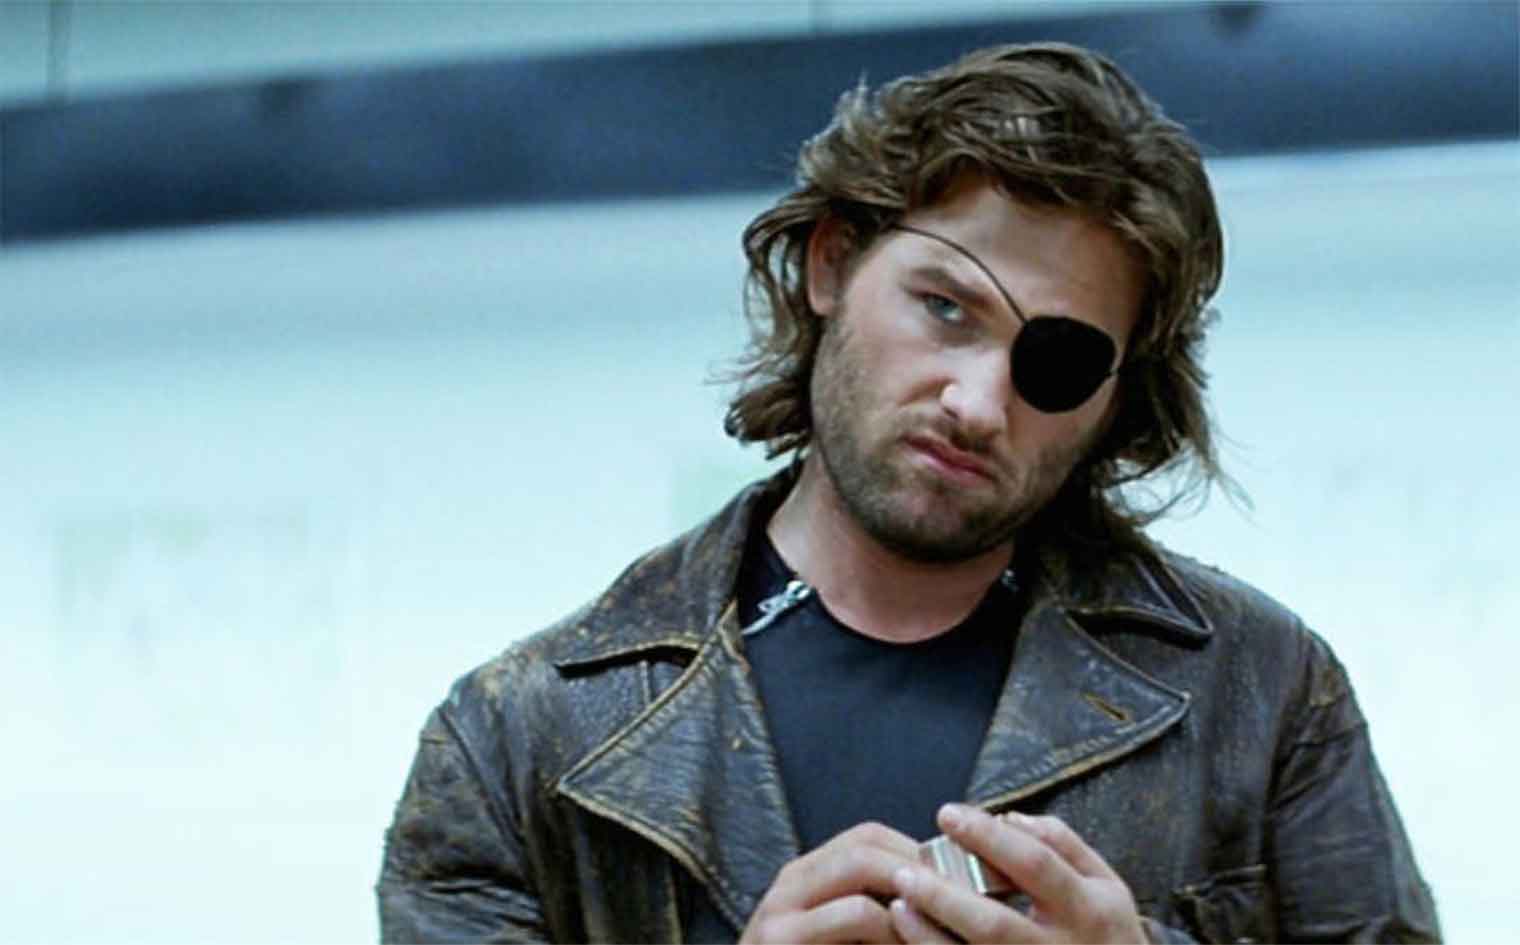 <p><em>Escape From New York</em>, directed by John Carpenter, embarked on a remarkable journey from an underground cult classic movie that paid homage to the western films Carpenter loved to an influential action film that utilized its minimal budget to craft an unforgettable visual landscape and introduce one of the most iconic action movie characters of all time, Snake Plissken, portrayed by Kurt Russell.</p>  <p>When it was released in 1981, its dystopian vision of a crime-ridden Manhattan Island turned into a maximum-security prison resonated with the punk and post-apocalyptic sensibilities of the era. Its minimalist approach, characterized by Carpenter's signature synth score, clever practical effects, and Russell's charismatic performance, elevated the film above its budget constraints.</p>  <p>Over time, <em>Escape From New York</em> evolved into a touchstone for action cinema, inspiring a generation of filmmakers and introducing audiences to Snake Plissken, a character who would become a cultural icon.</p>